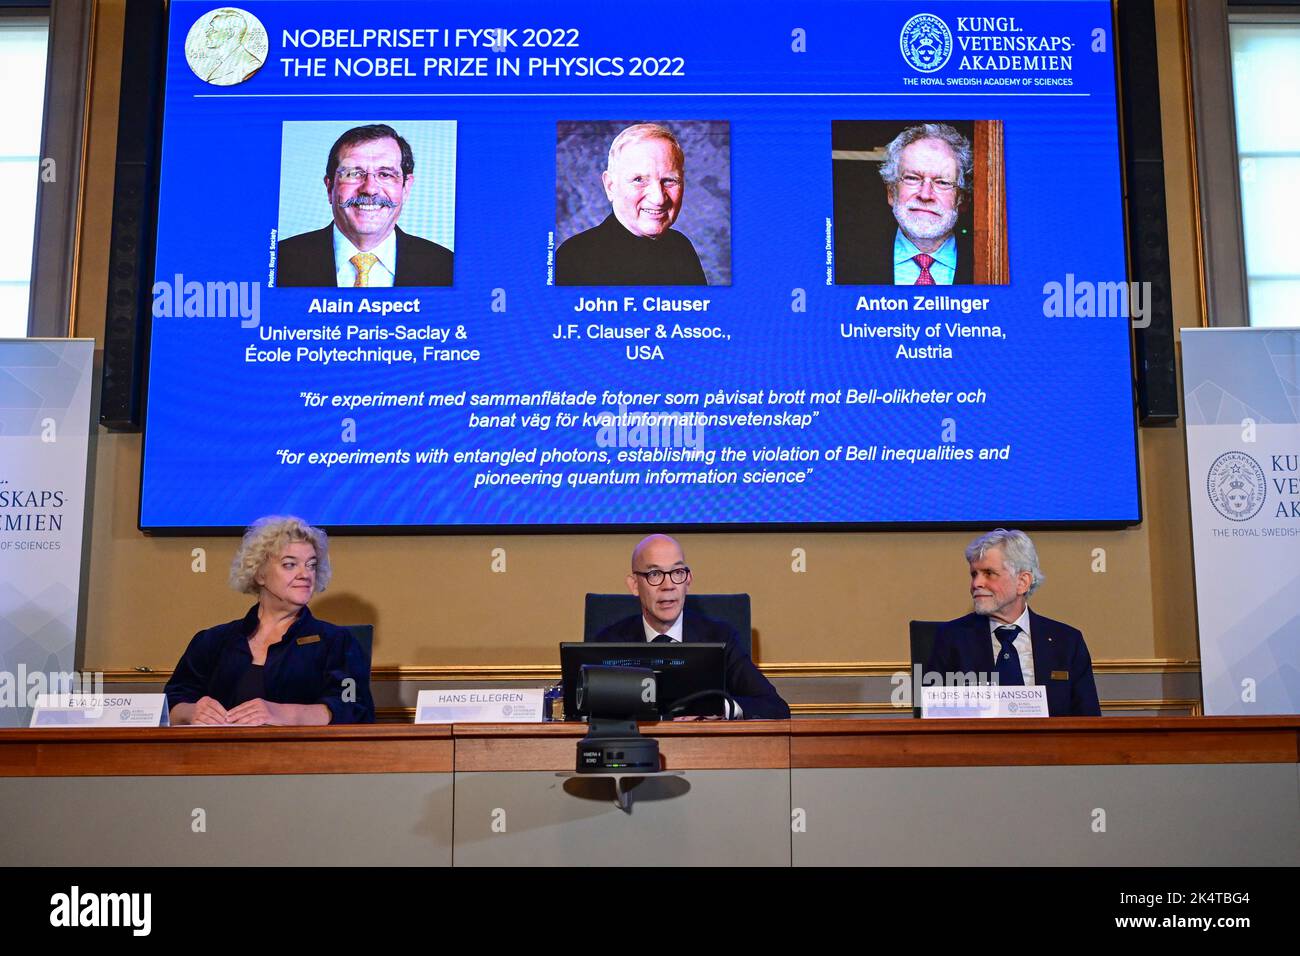 Secretary General of the Royal Swedish Academy of Sciences Hans Ellegren (C), Eva Olsson (L) and Thors Hans Hansson (R), members of the Nobel Committee for Physics announce the winners of the 2022 Nobel Prize in Physics (L-R on the screen)  Alain Aspect, John F. Clauser and Anton Zeilinger, during a press conference at The Royal Swedish Academy of Sciences in Stockholm, Sweden, on October 4, 2022.Photo: Jonas Ekstromer / TT / code 10030 Stock Photo